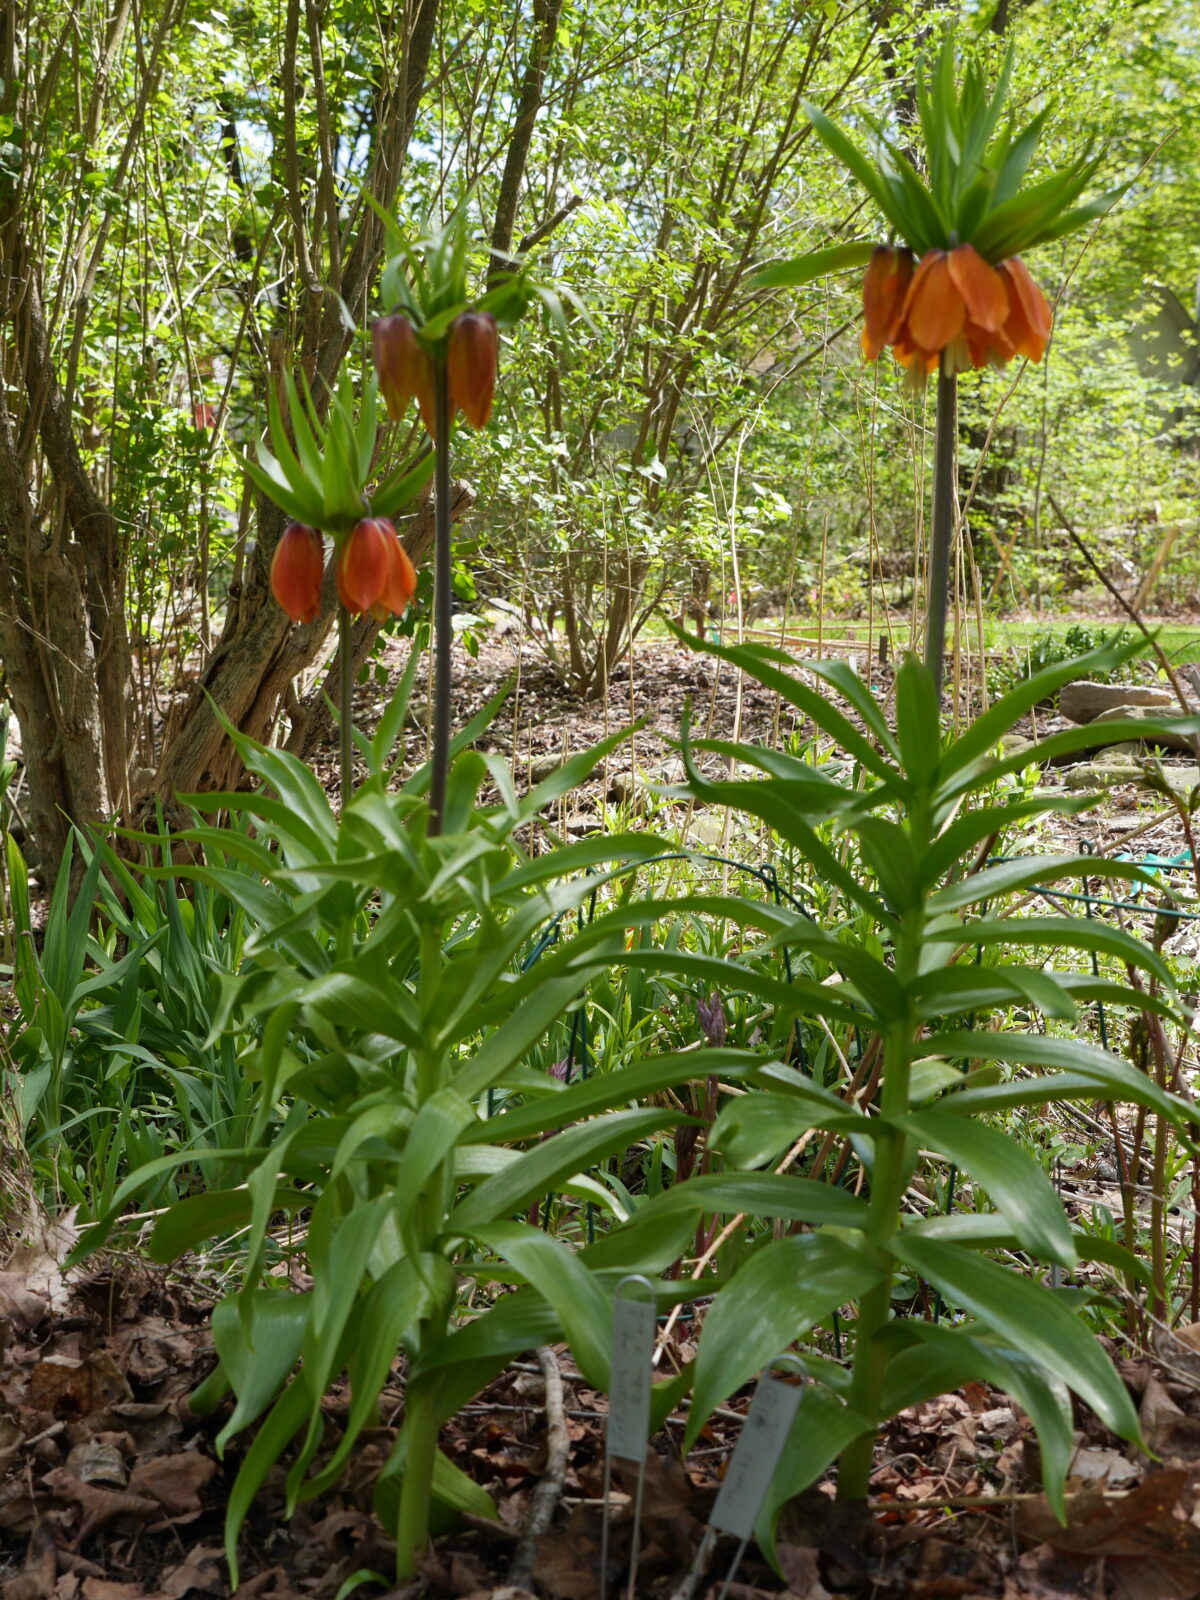 Fritillaria imperialis can grow up to 28 inches tall on stems that will need support in windy locations. Like F. Lutea, it has a 